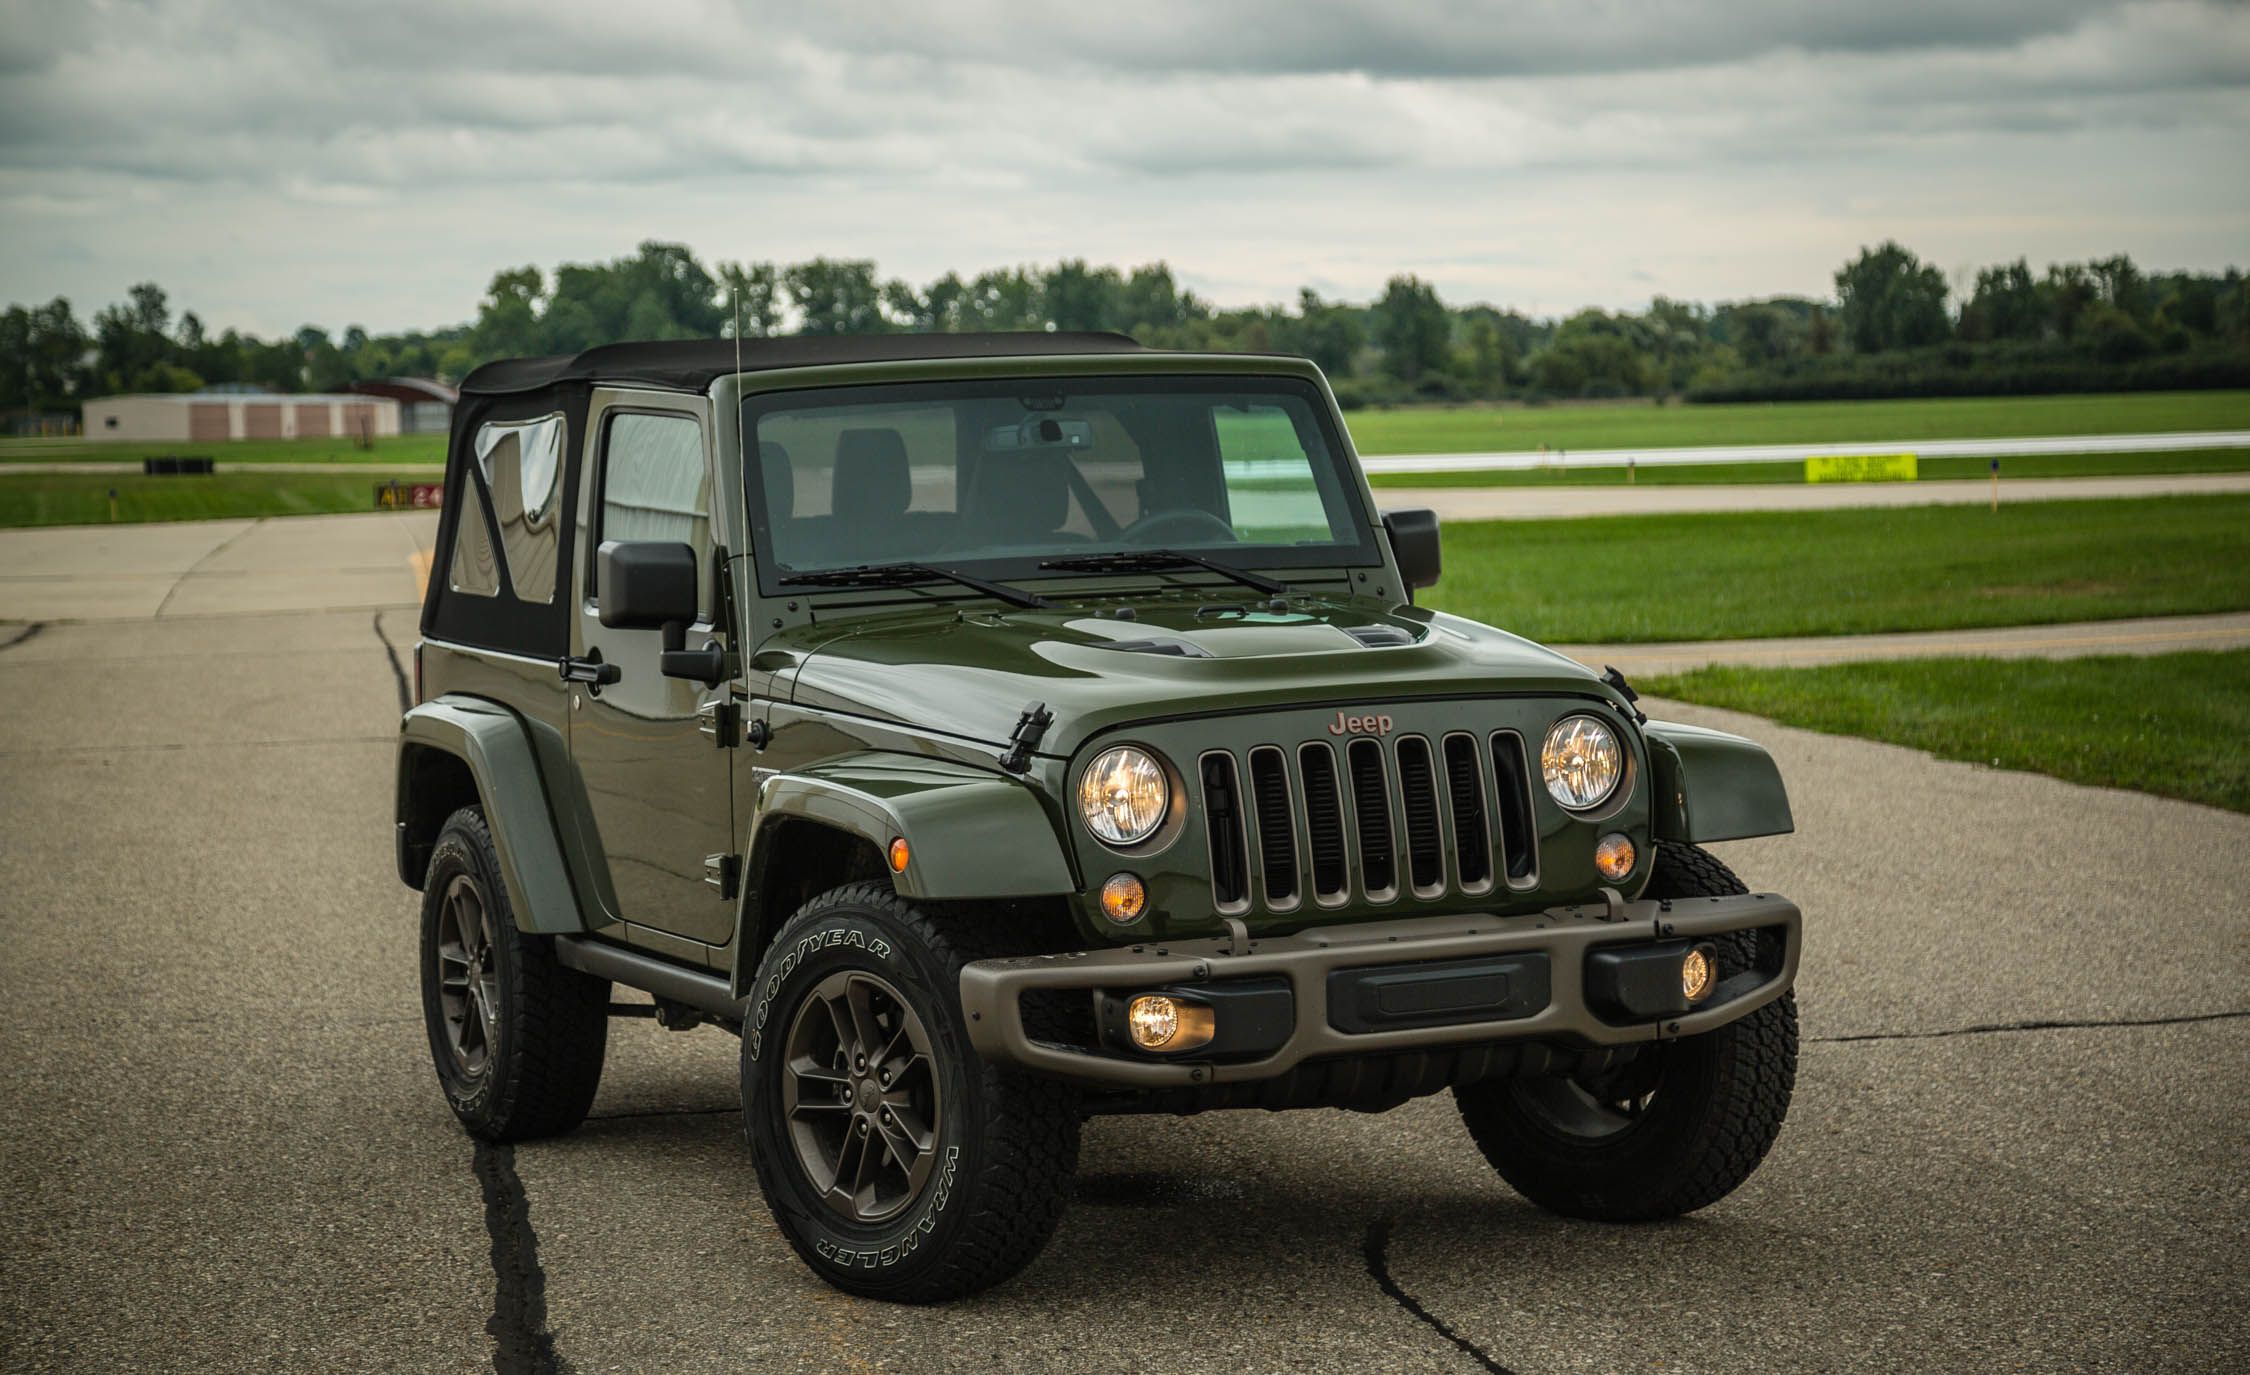 bao michael jordan s daughter s dreams were made a reality when he surprised her with a super rare jeep wrangler unlimited sahara 6551d484810e0 Michael Jordan's Daughter's Dreams Were Made A Reality When He Surprised Her With A Super Rare Jeep Wrangler Unlimited Sahara.